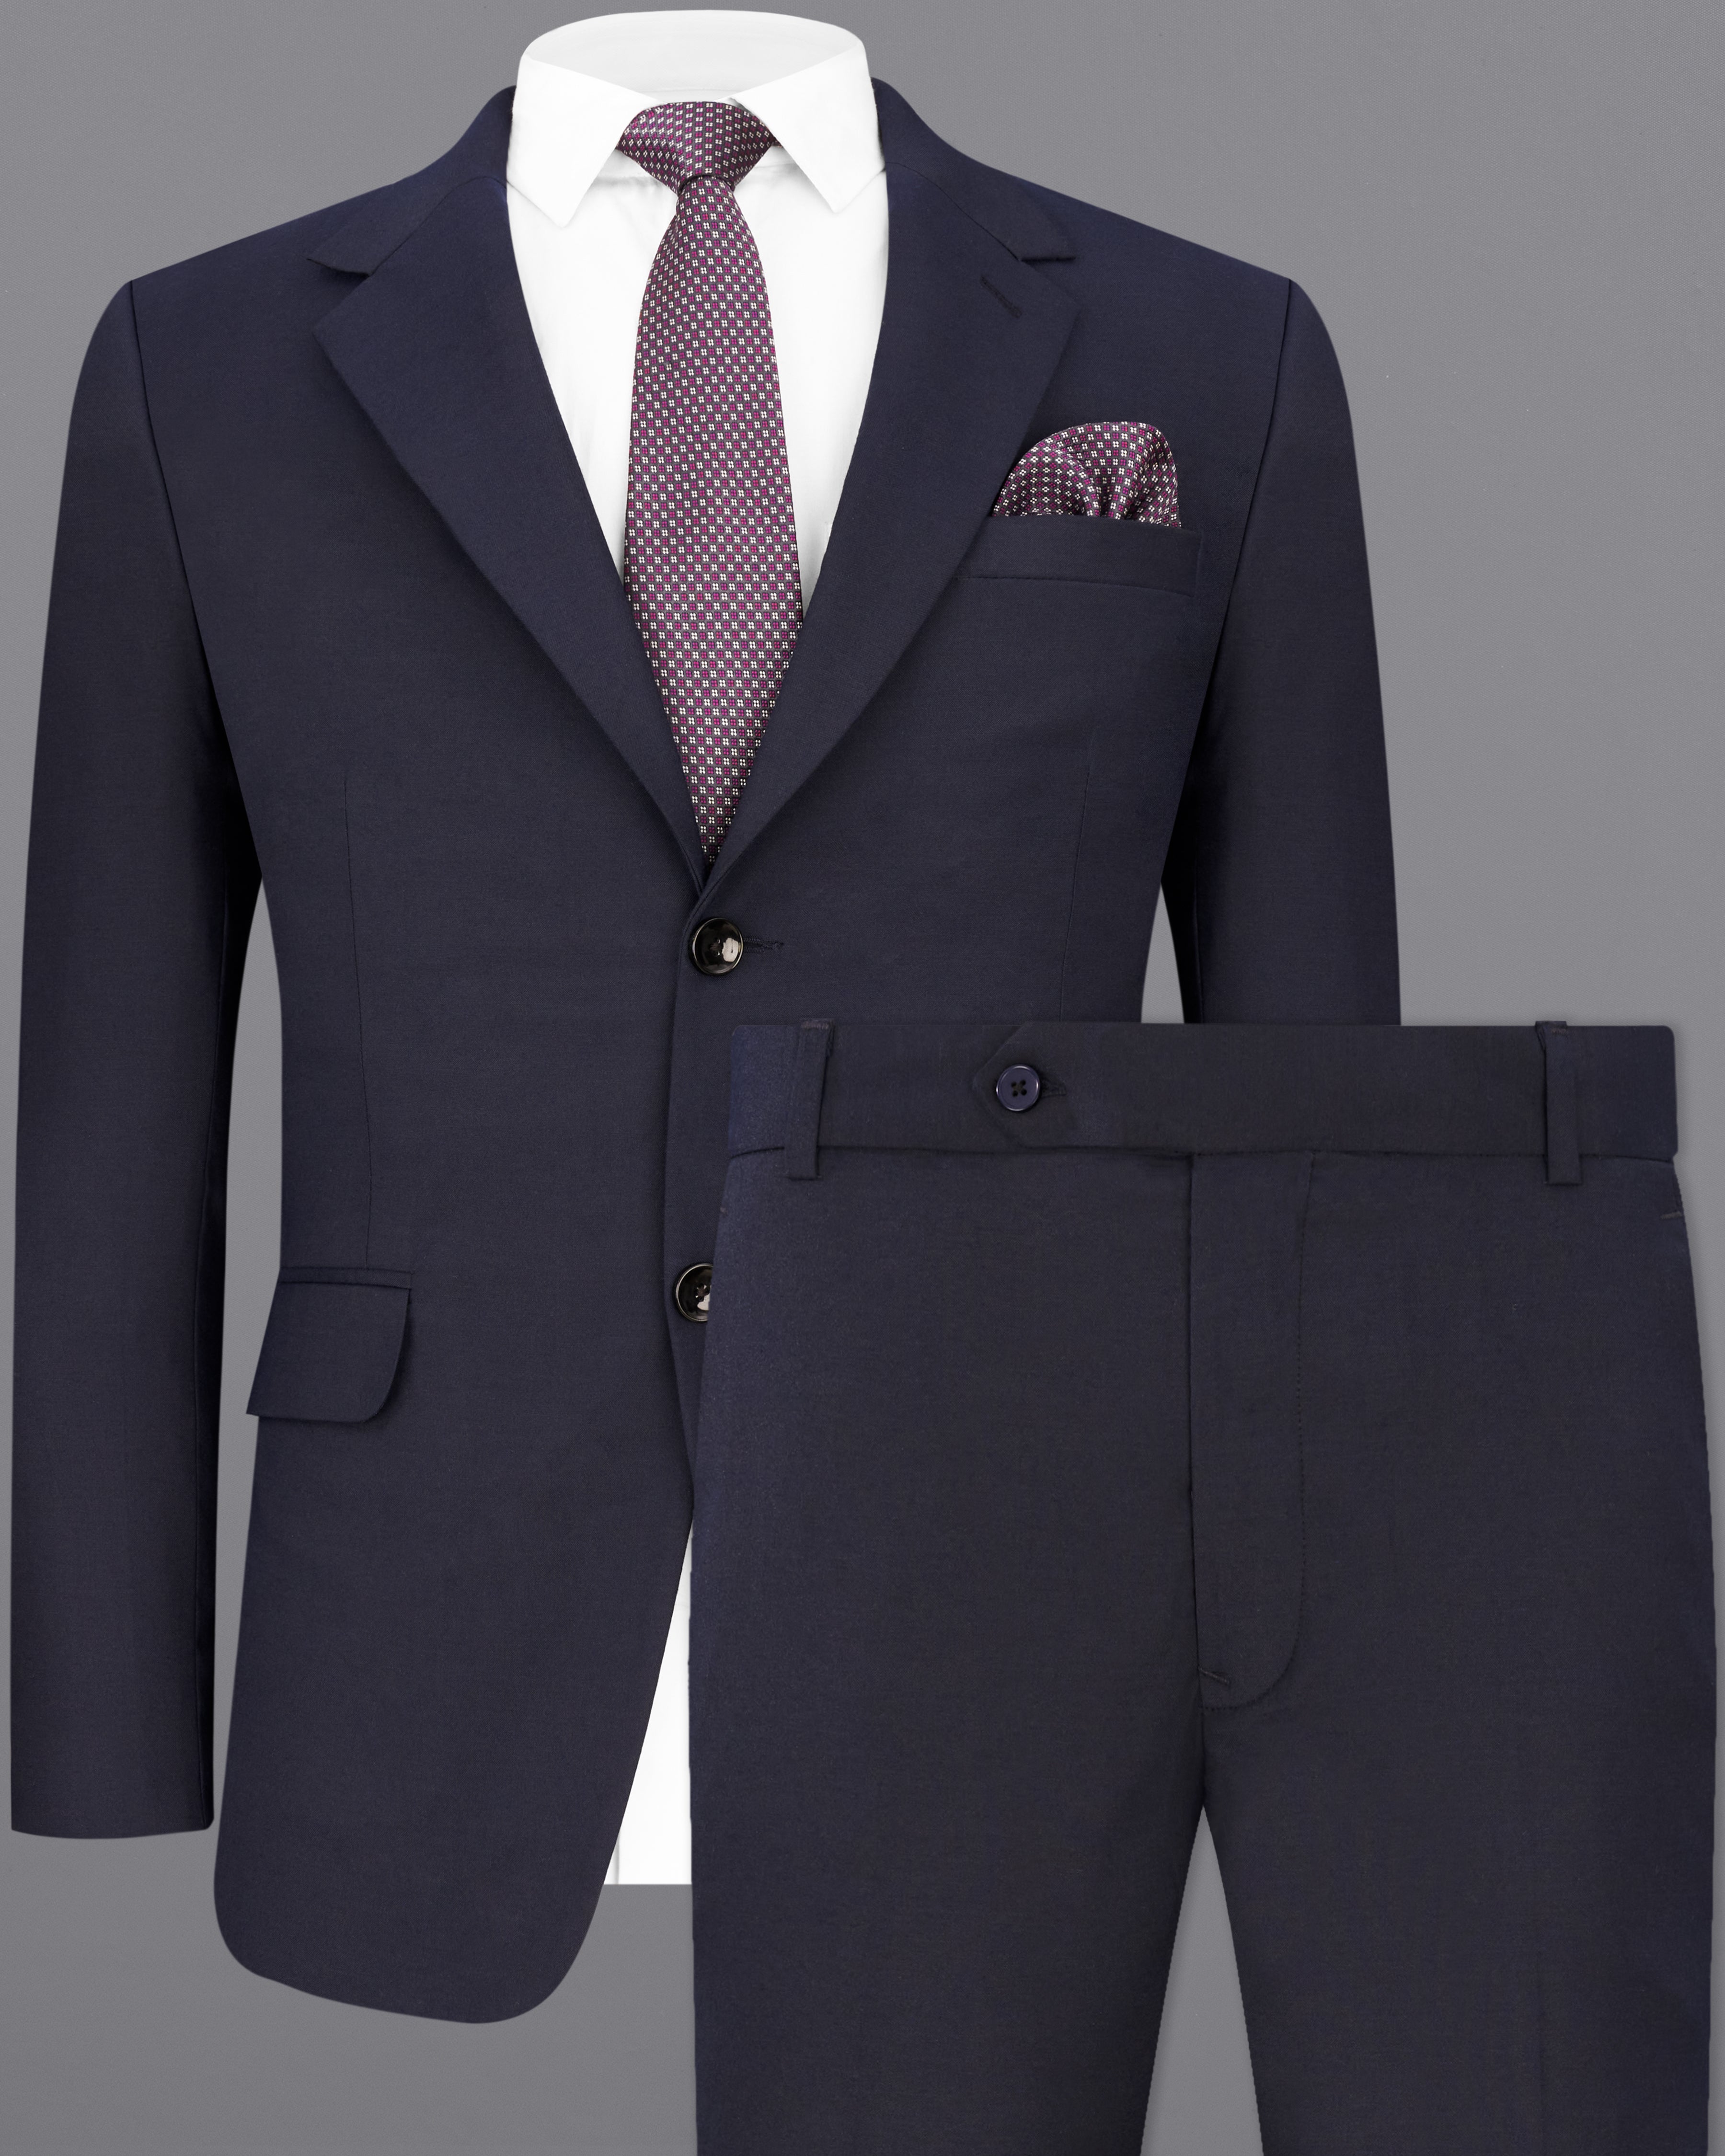 Baltic Sea Navy Blue Single Breasted Suit ST2293-SB-36, ST2293-SB-38, ST2293-SB-40, ST2293-SB-42, ST2293-SB-44, ST2293-SB-46, ST2293-SB-48, ST2293-SB-50, ST2293-SB-52, ST2293-SB-54, ST2293-SB-56, ST2293-SB-58, ST2293-SB-60